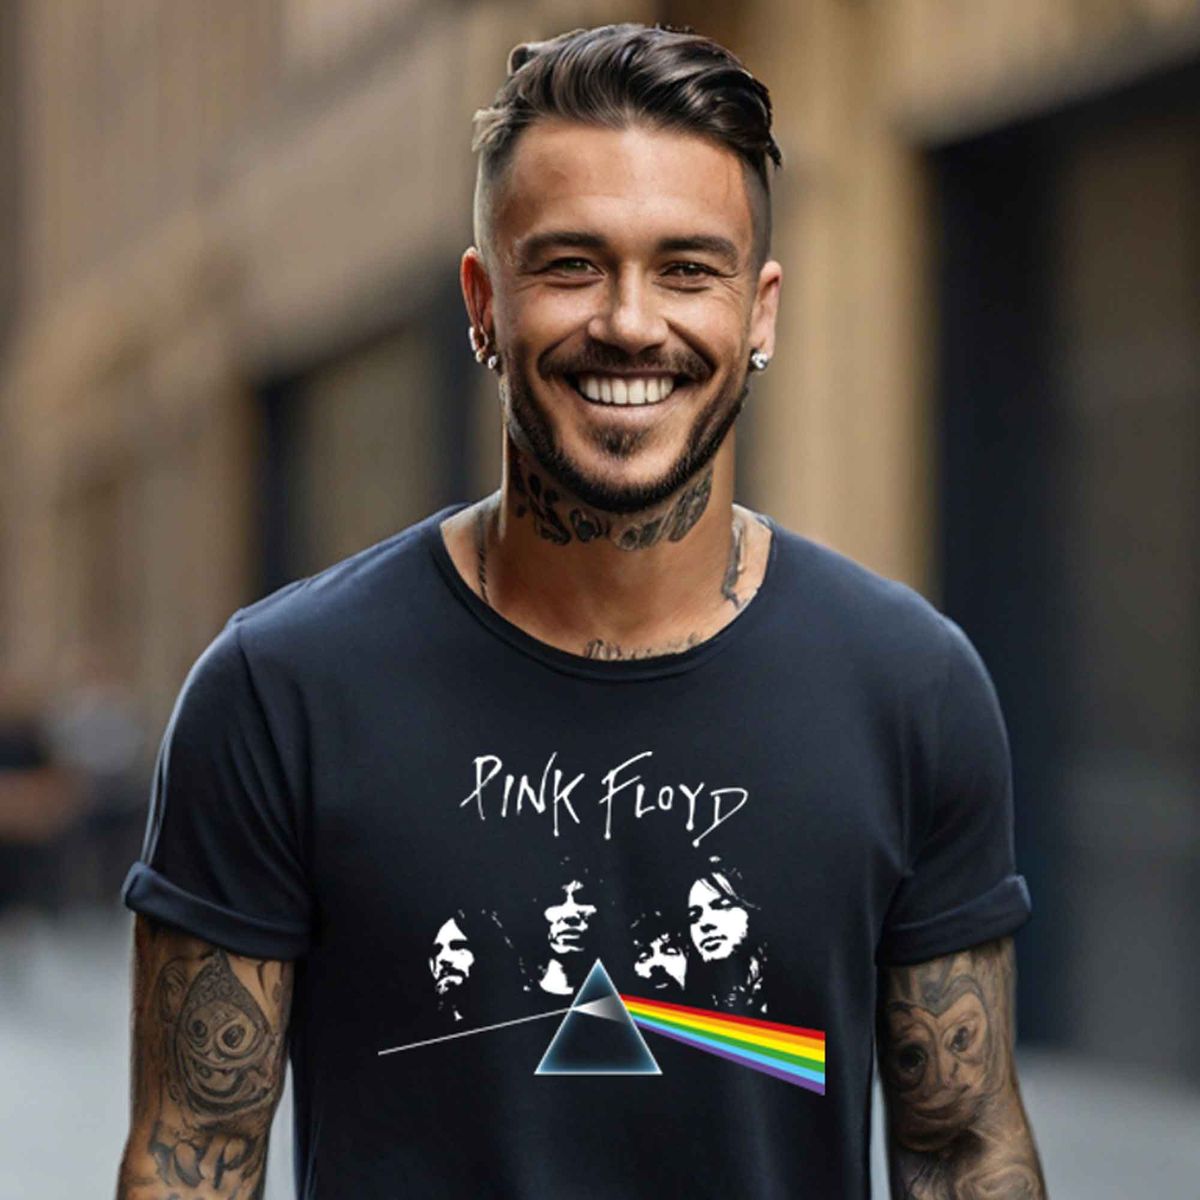 Nome do produto: Pink Floyd - The Dark Side of the Moon